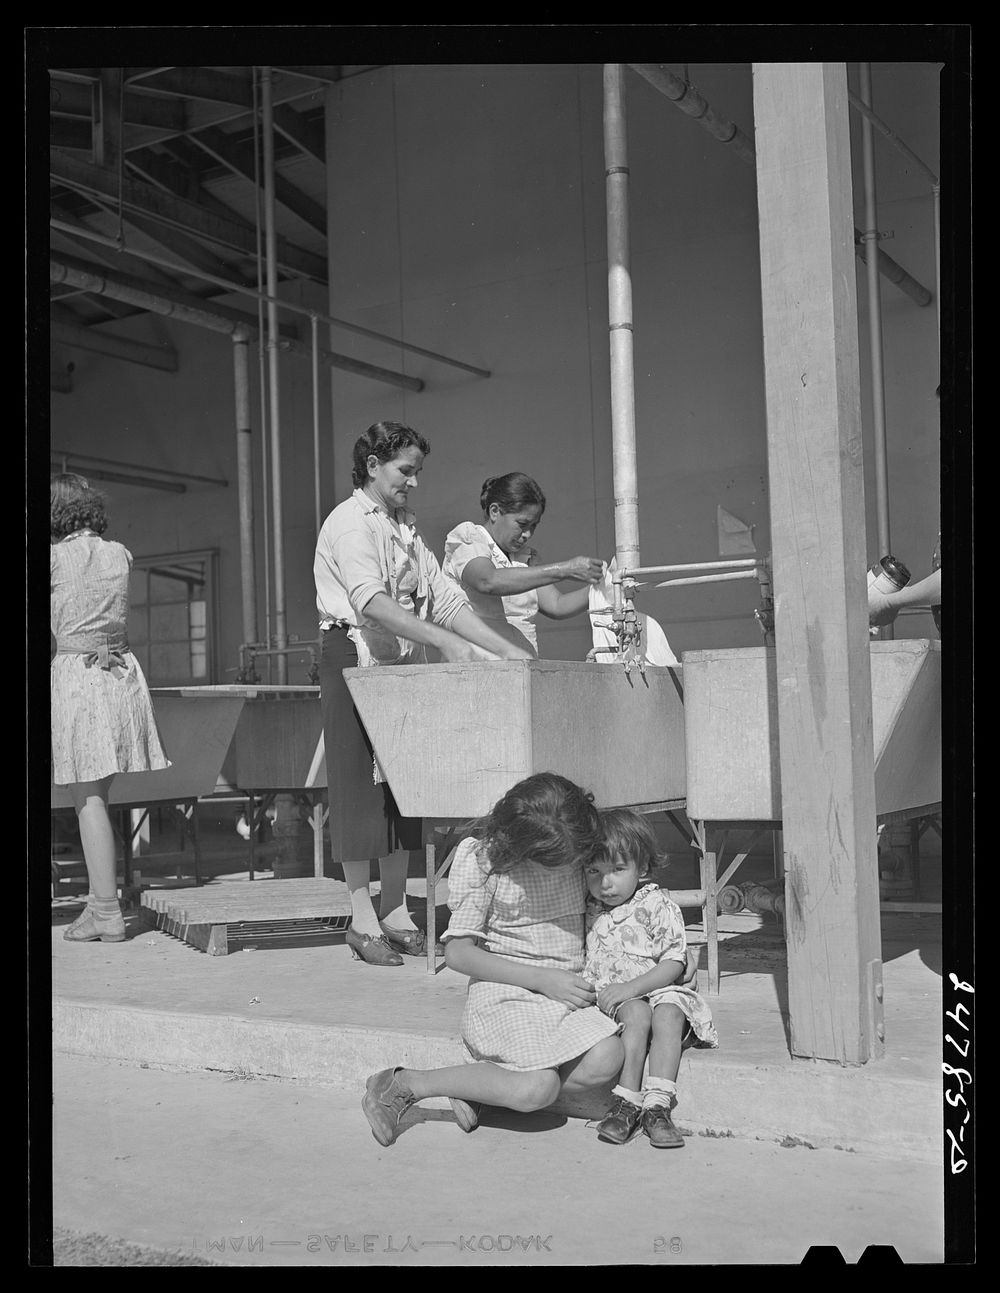 [Untitled photo, possibly related to: Community laundry. FSA (Farm Security Administration) camp, Robstown, Texas]. Sourced…